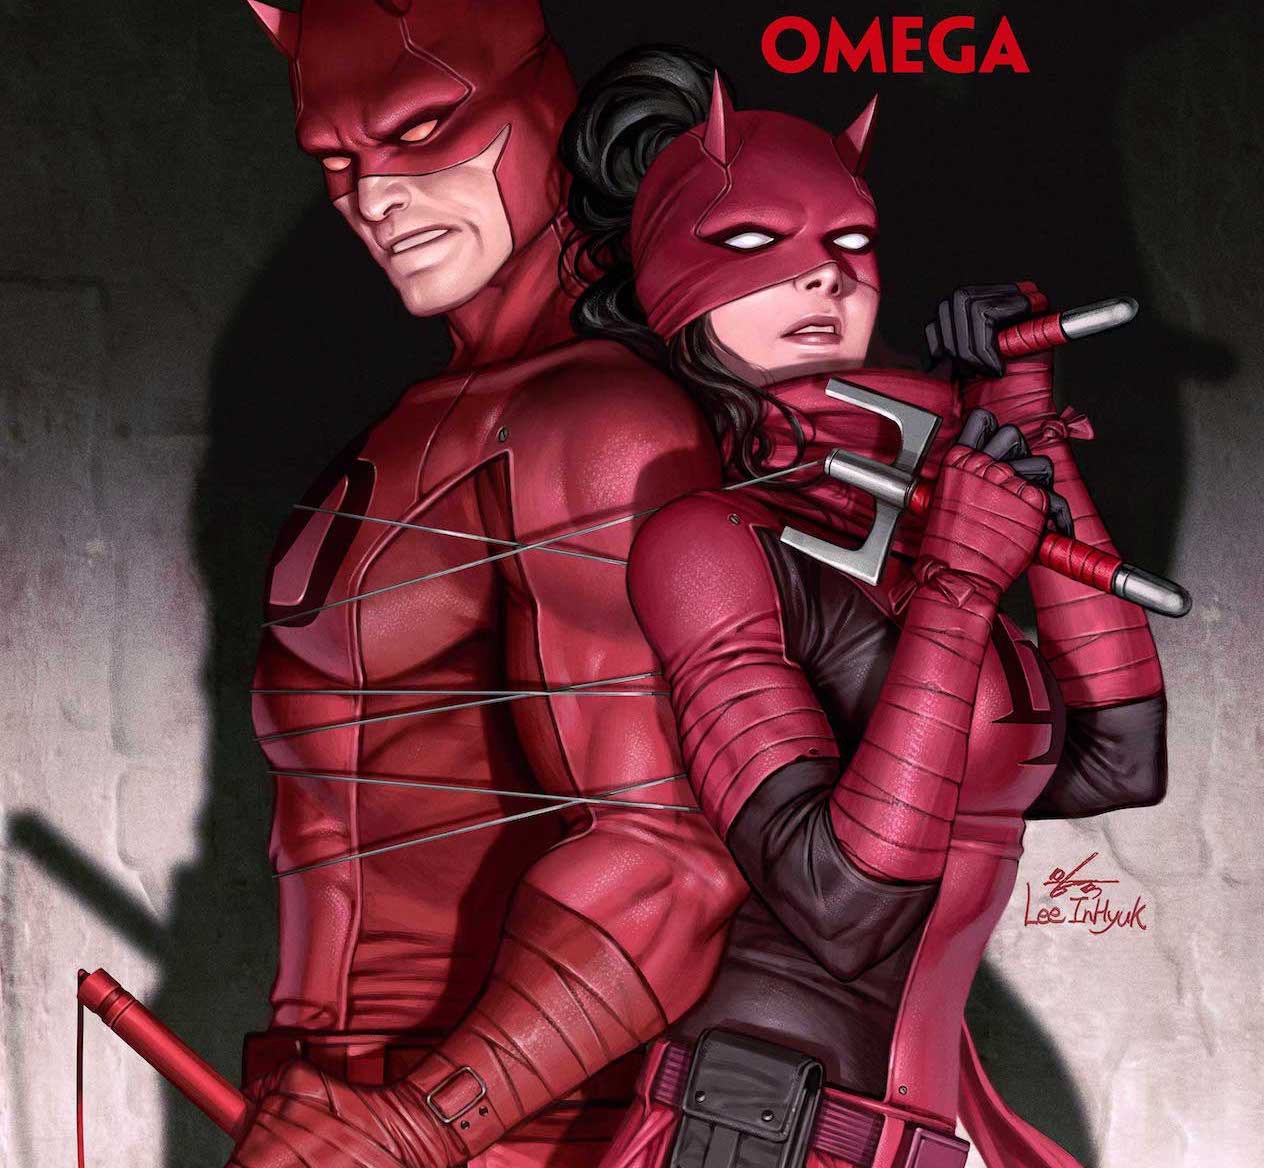 Marvel signals 'Devil's Reign' to end with Omega issue in May 2022